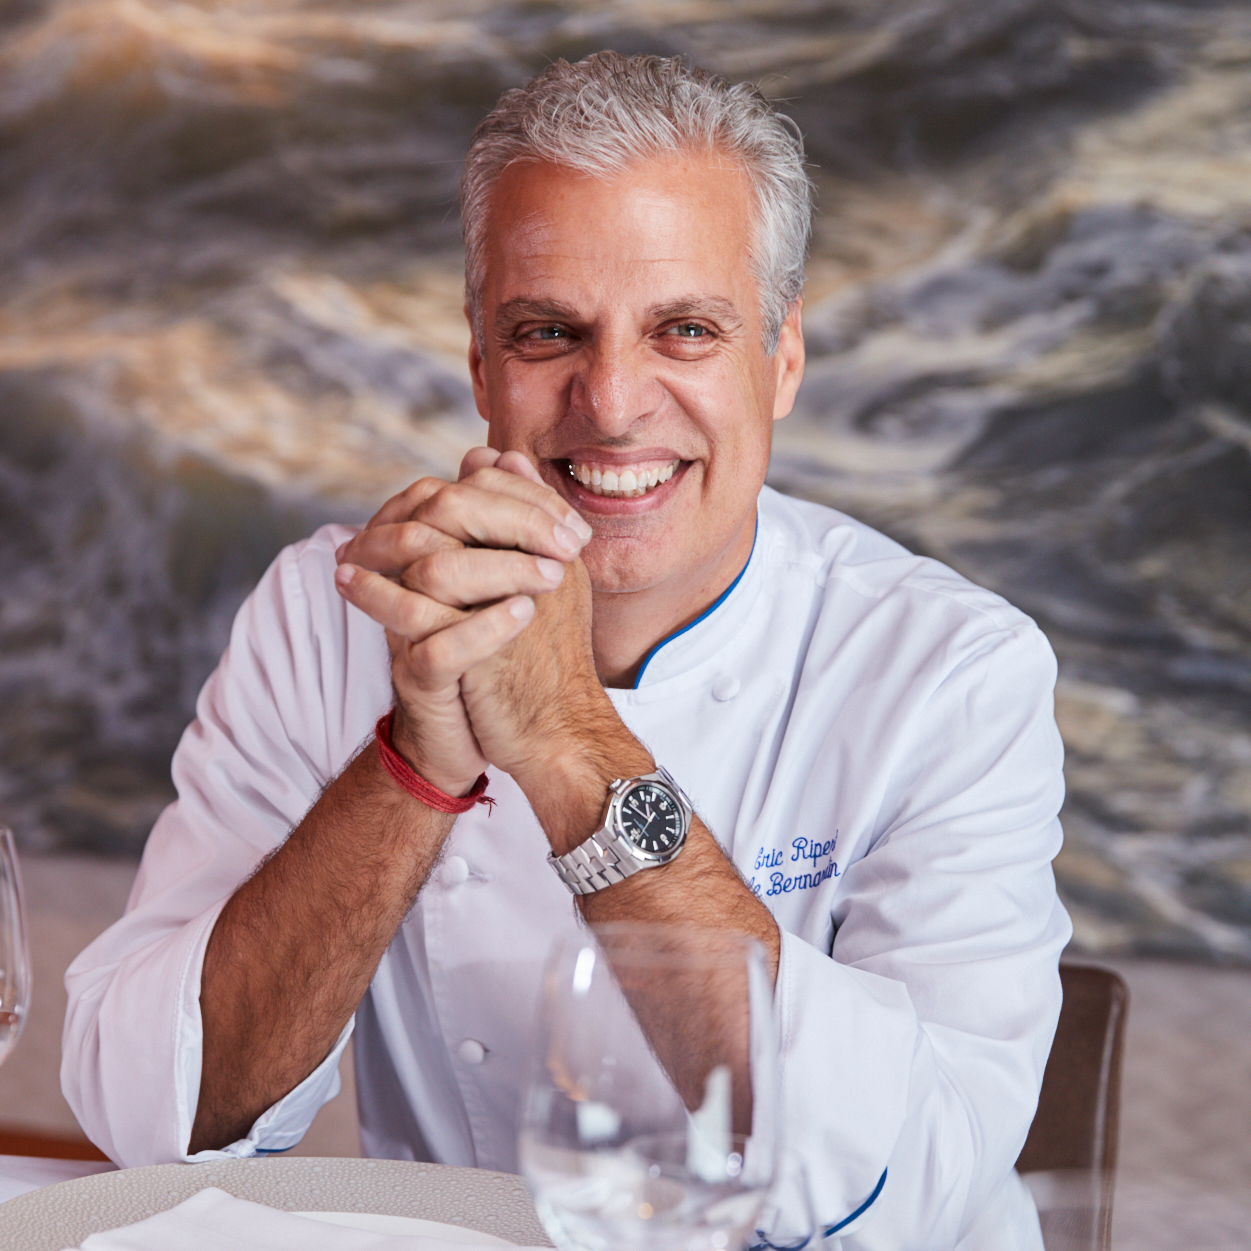 Eric Ripert: The Chef Who Made Seafood Simple